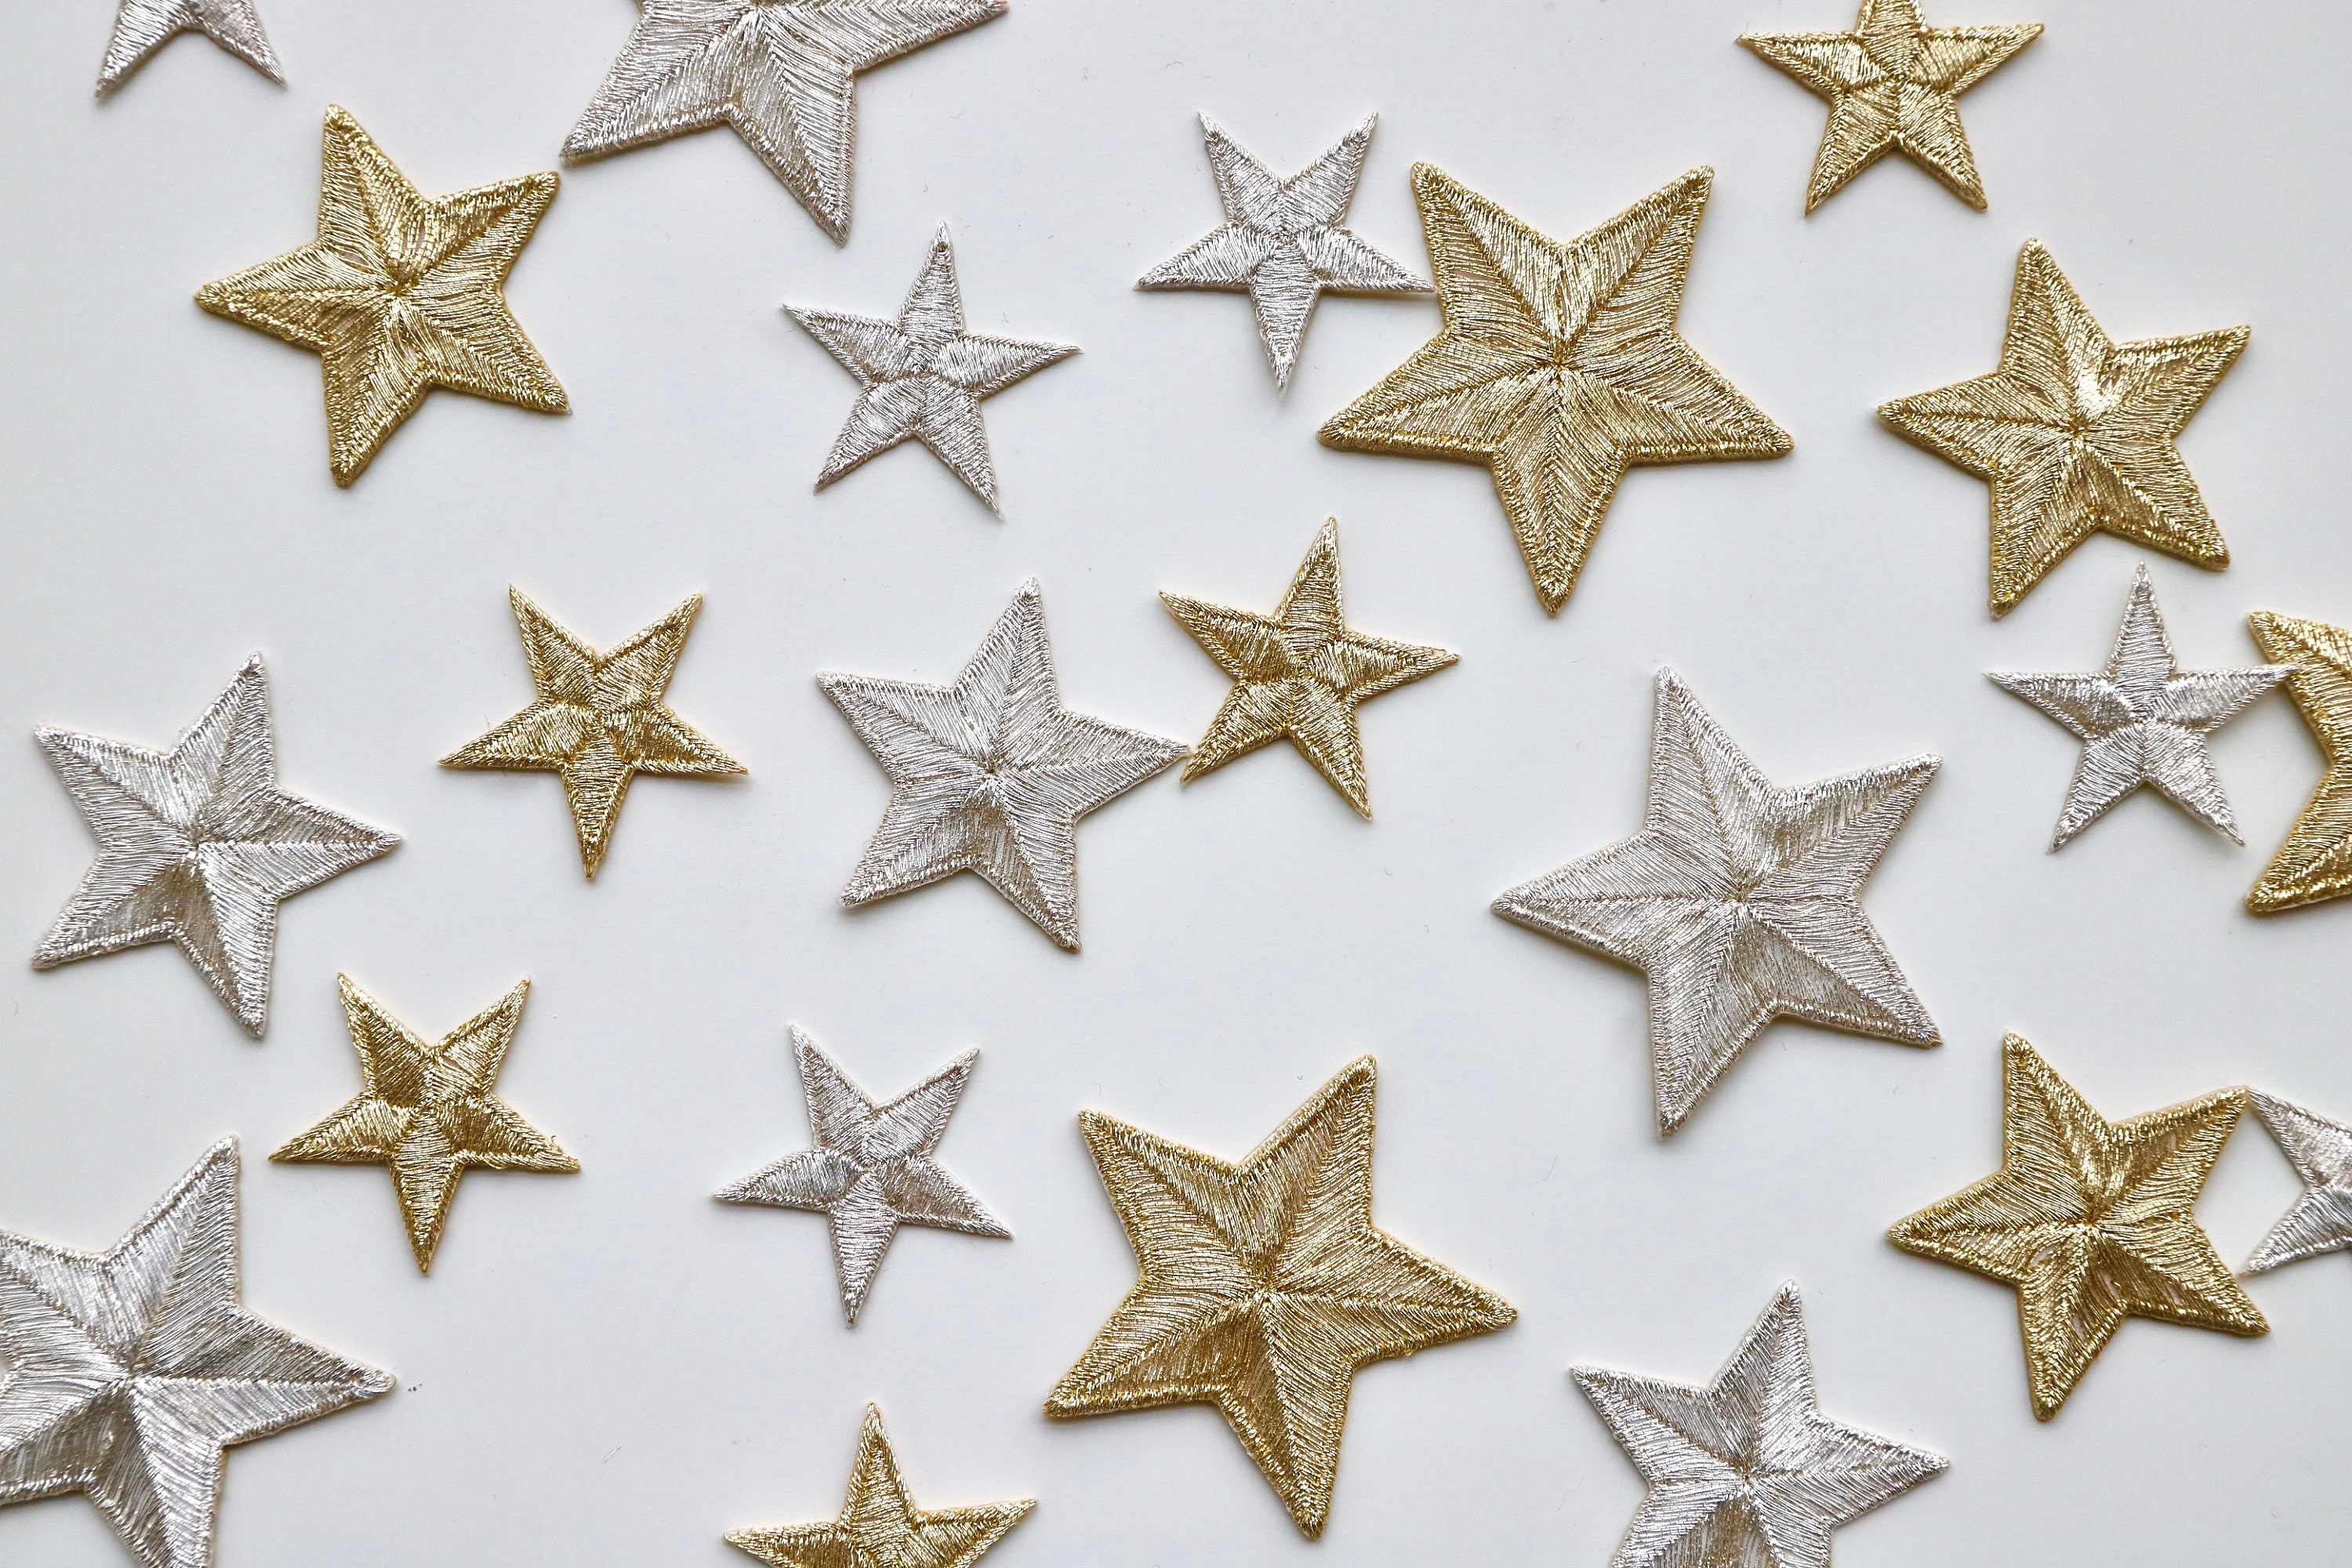  Gold Silver Cross Stars Embroidered Patches Sew Iron On Badges  Punk Gothic for Clothes Bag Coat Backpack DIY Appliques Craft Decoration  (Gold) : Arts, Crafts & Sewing